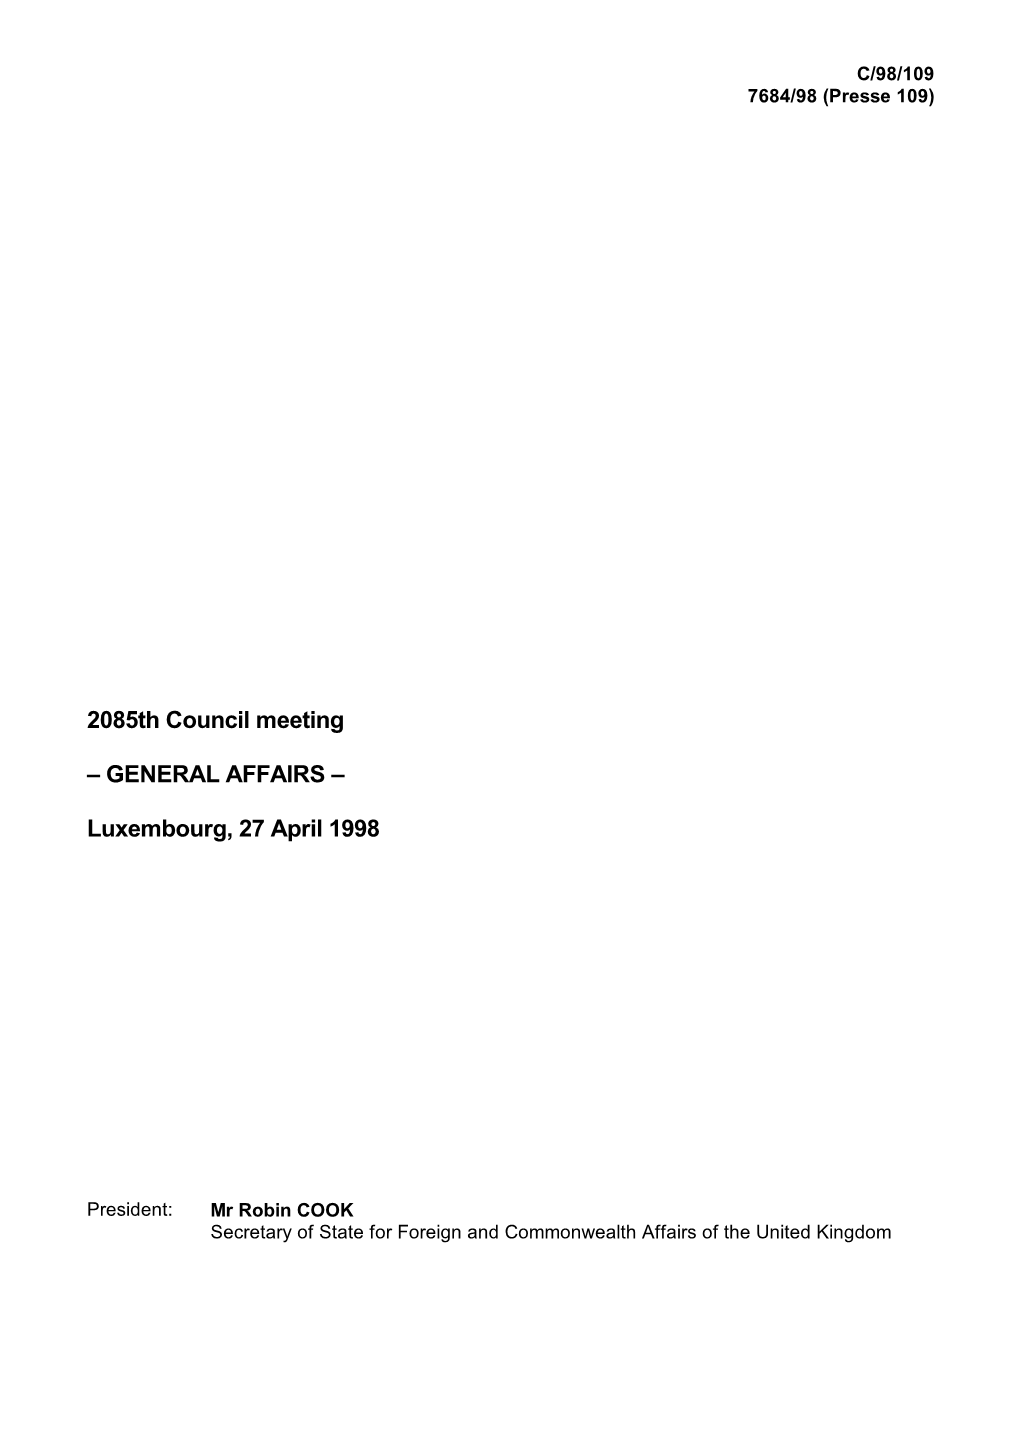 2085Th Council Meeting